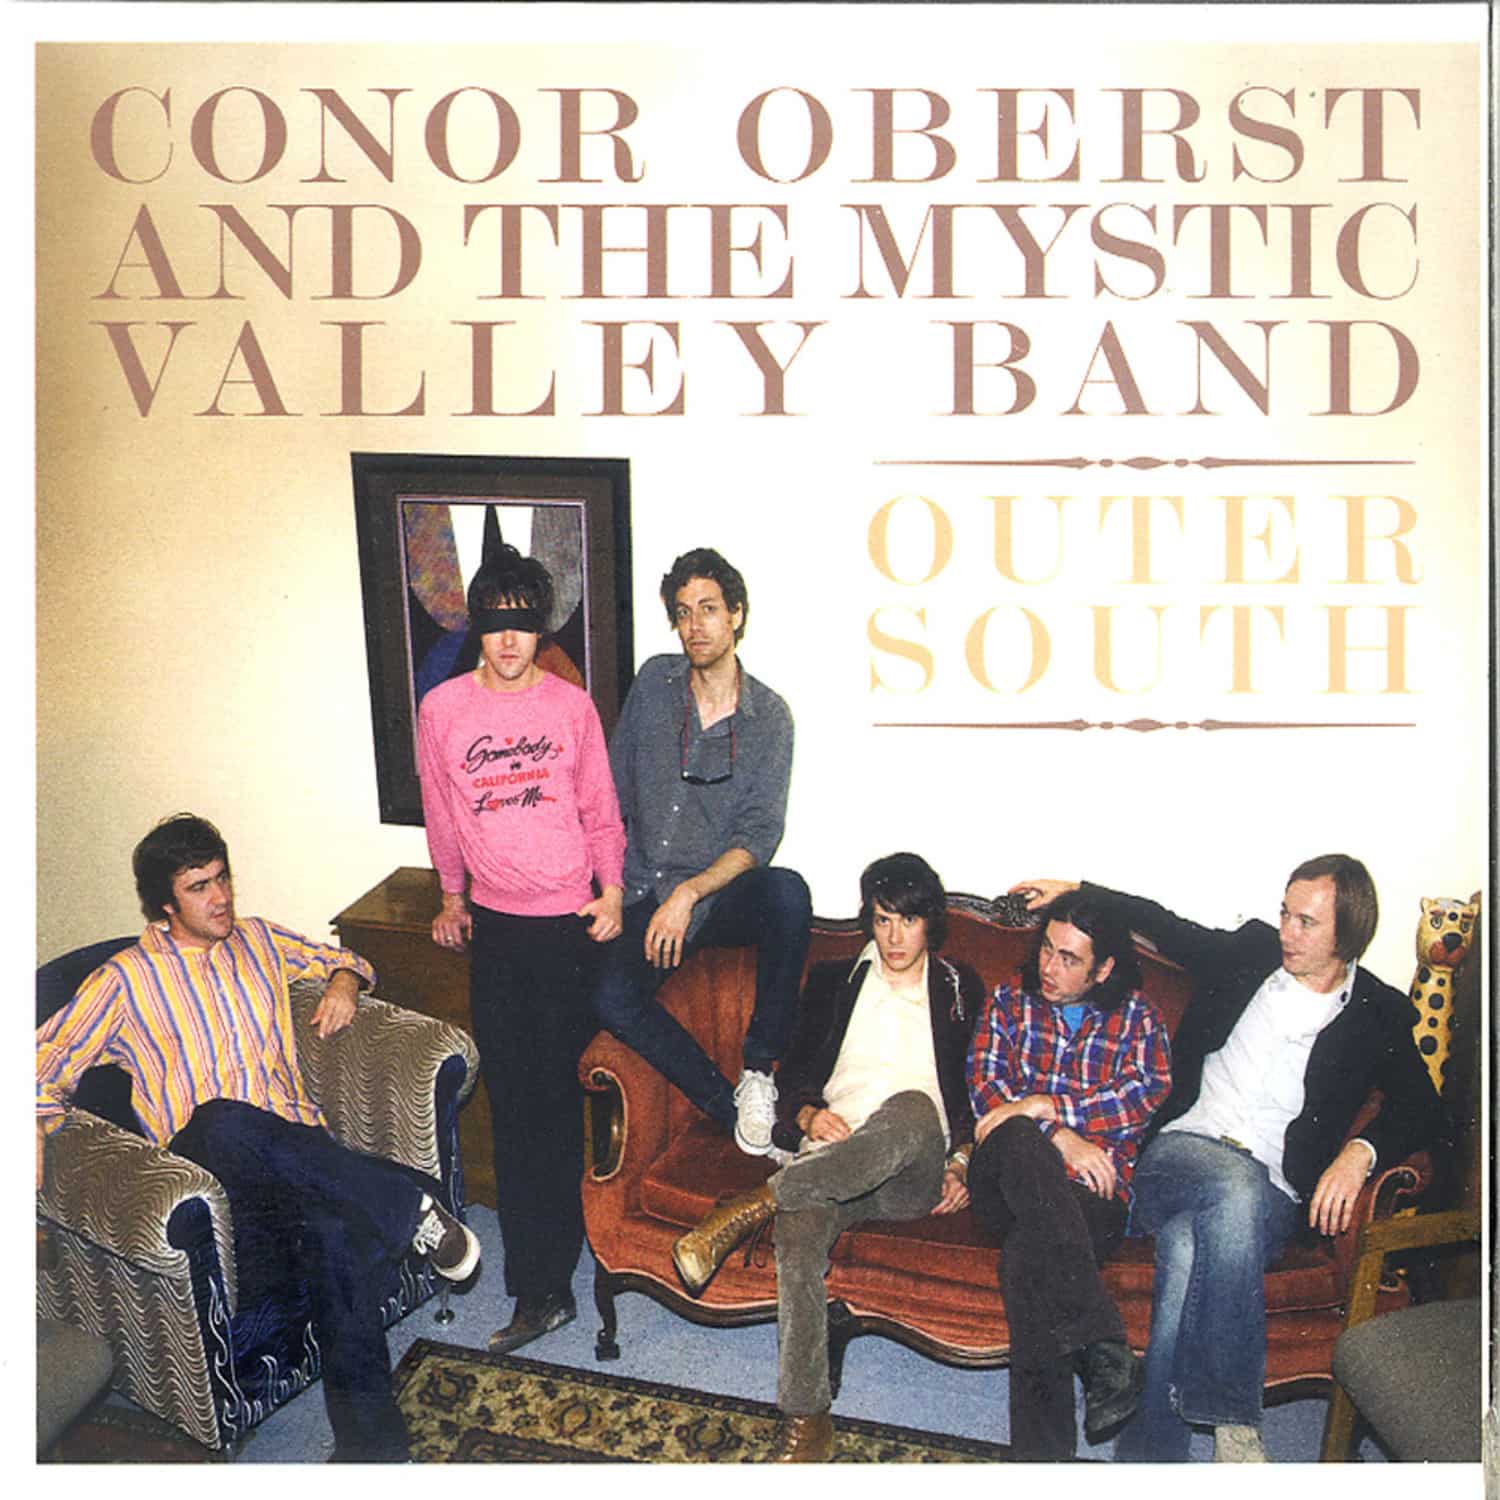 Conor Oberst And The Mystic Valley Band - ER SOUTH 